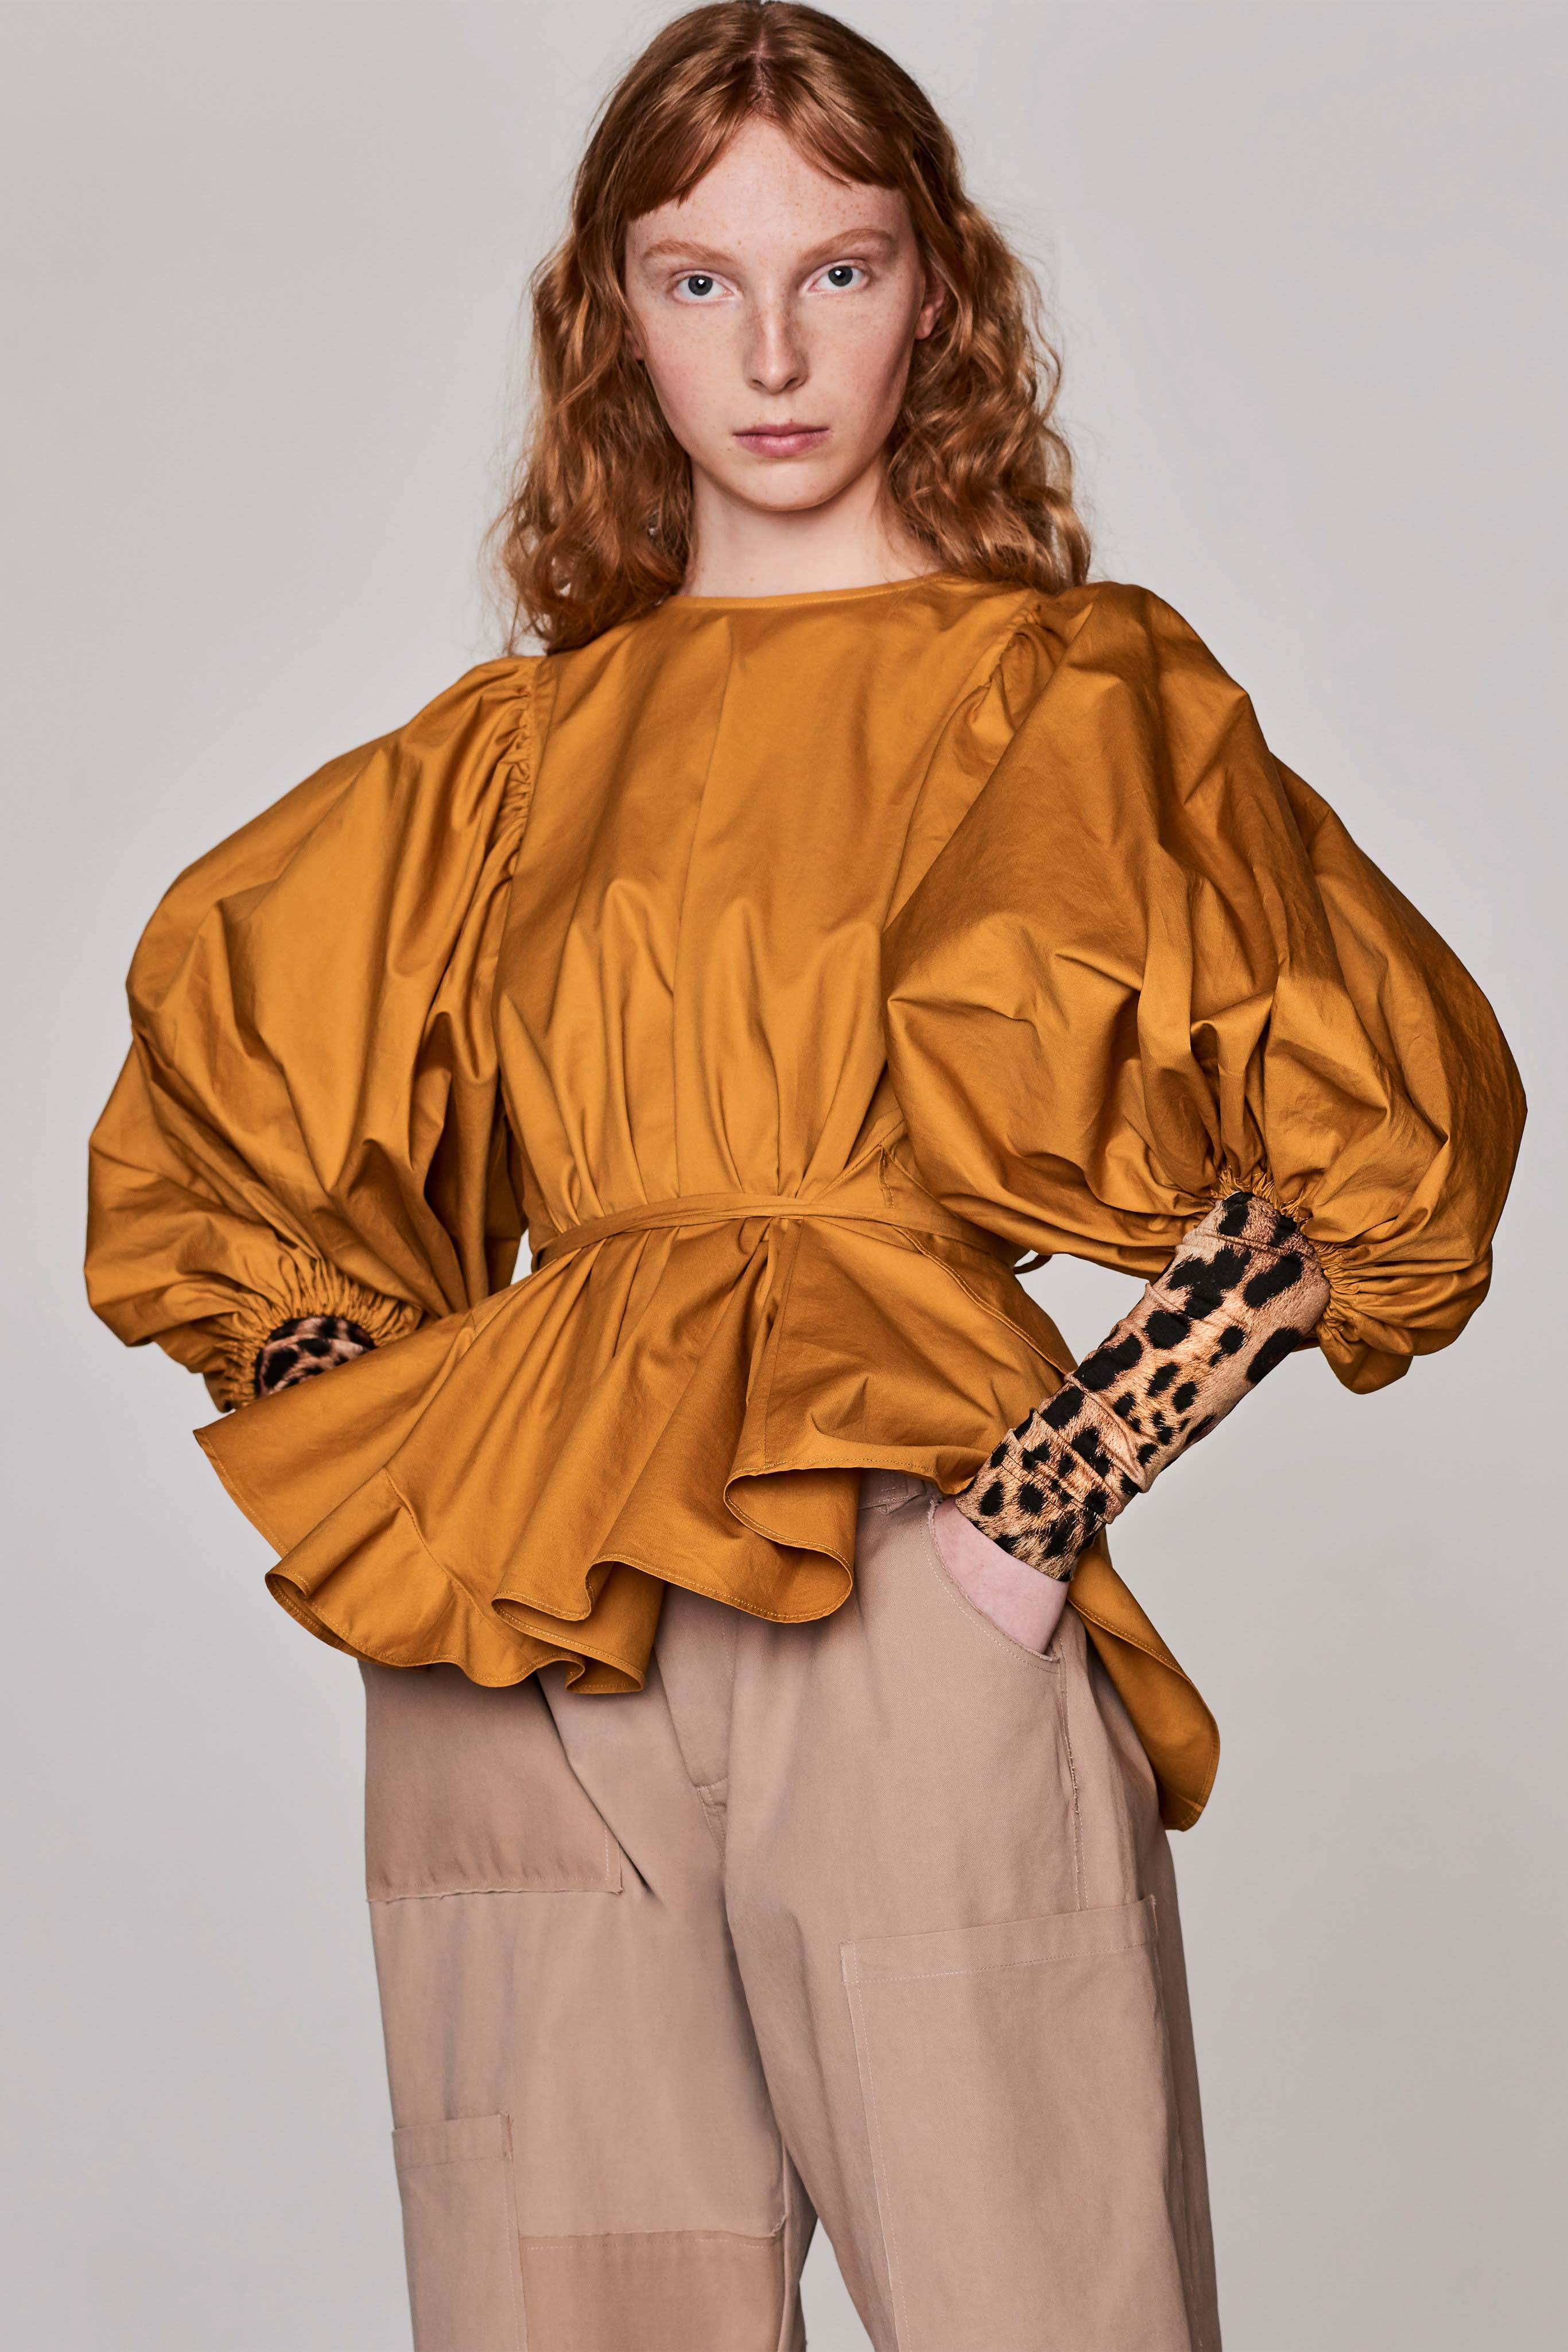 Preen Line Pre fall 2020 Lookbook trends runway coverage Ready To Wear Vogue fall neutrals